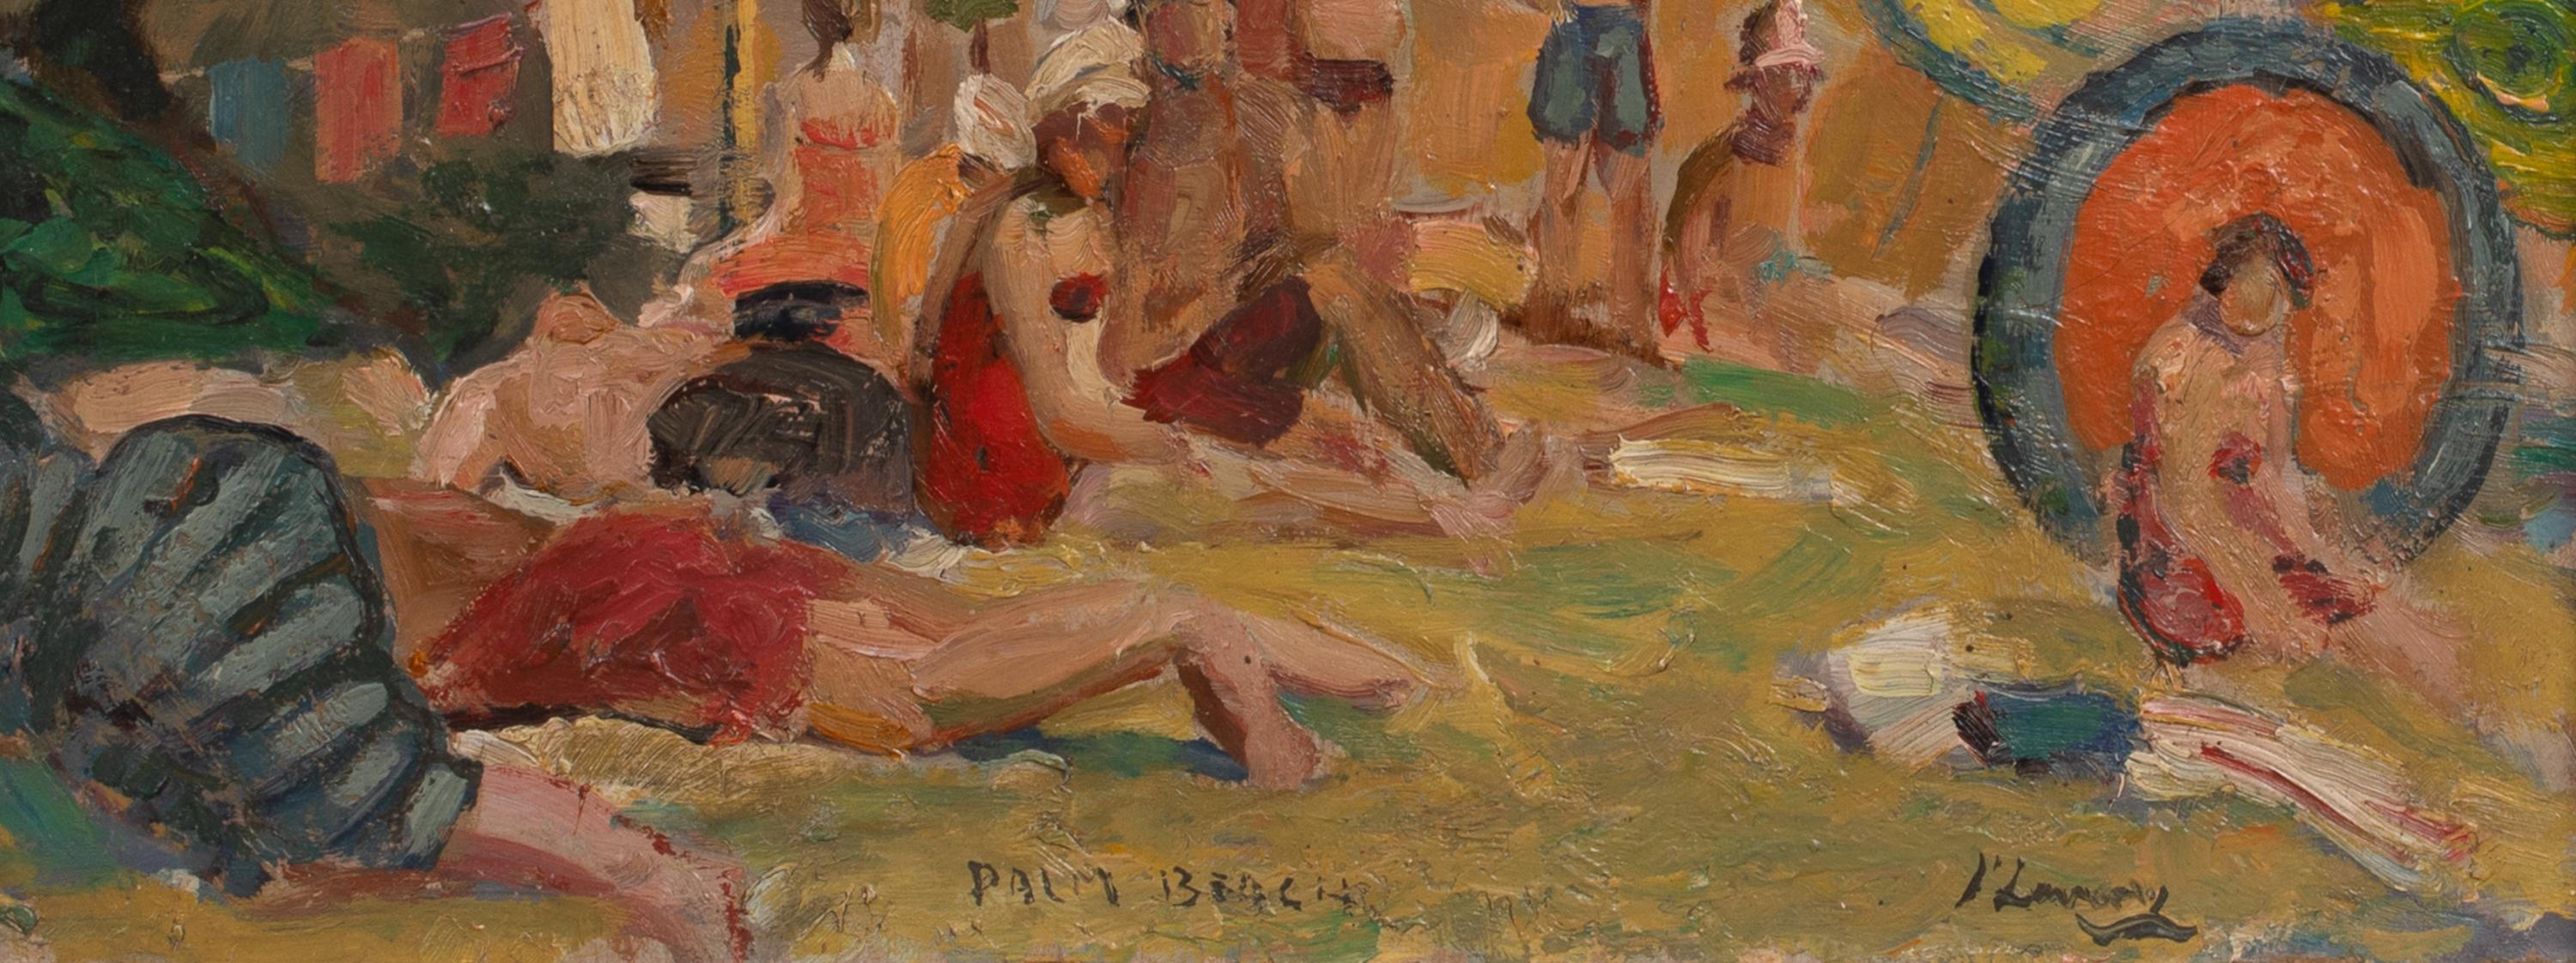 Palm Beach, Florida, early 20th century  signed 